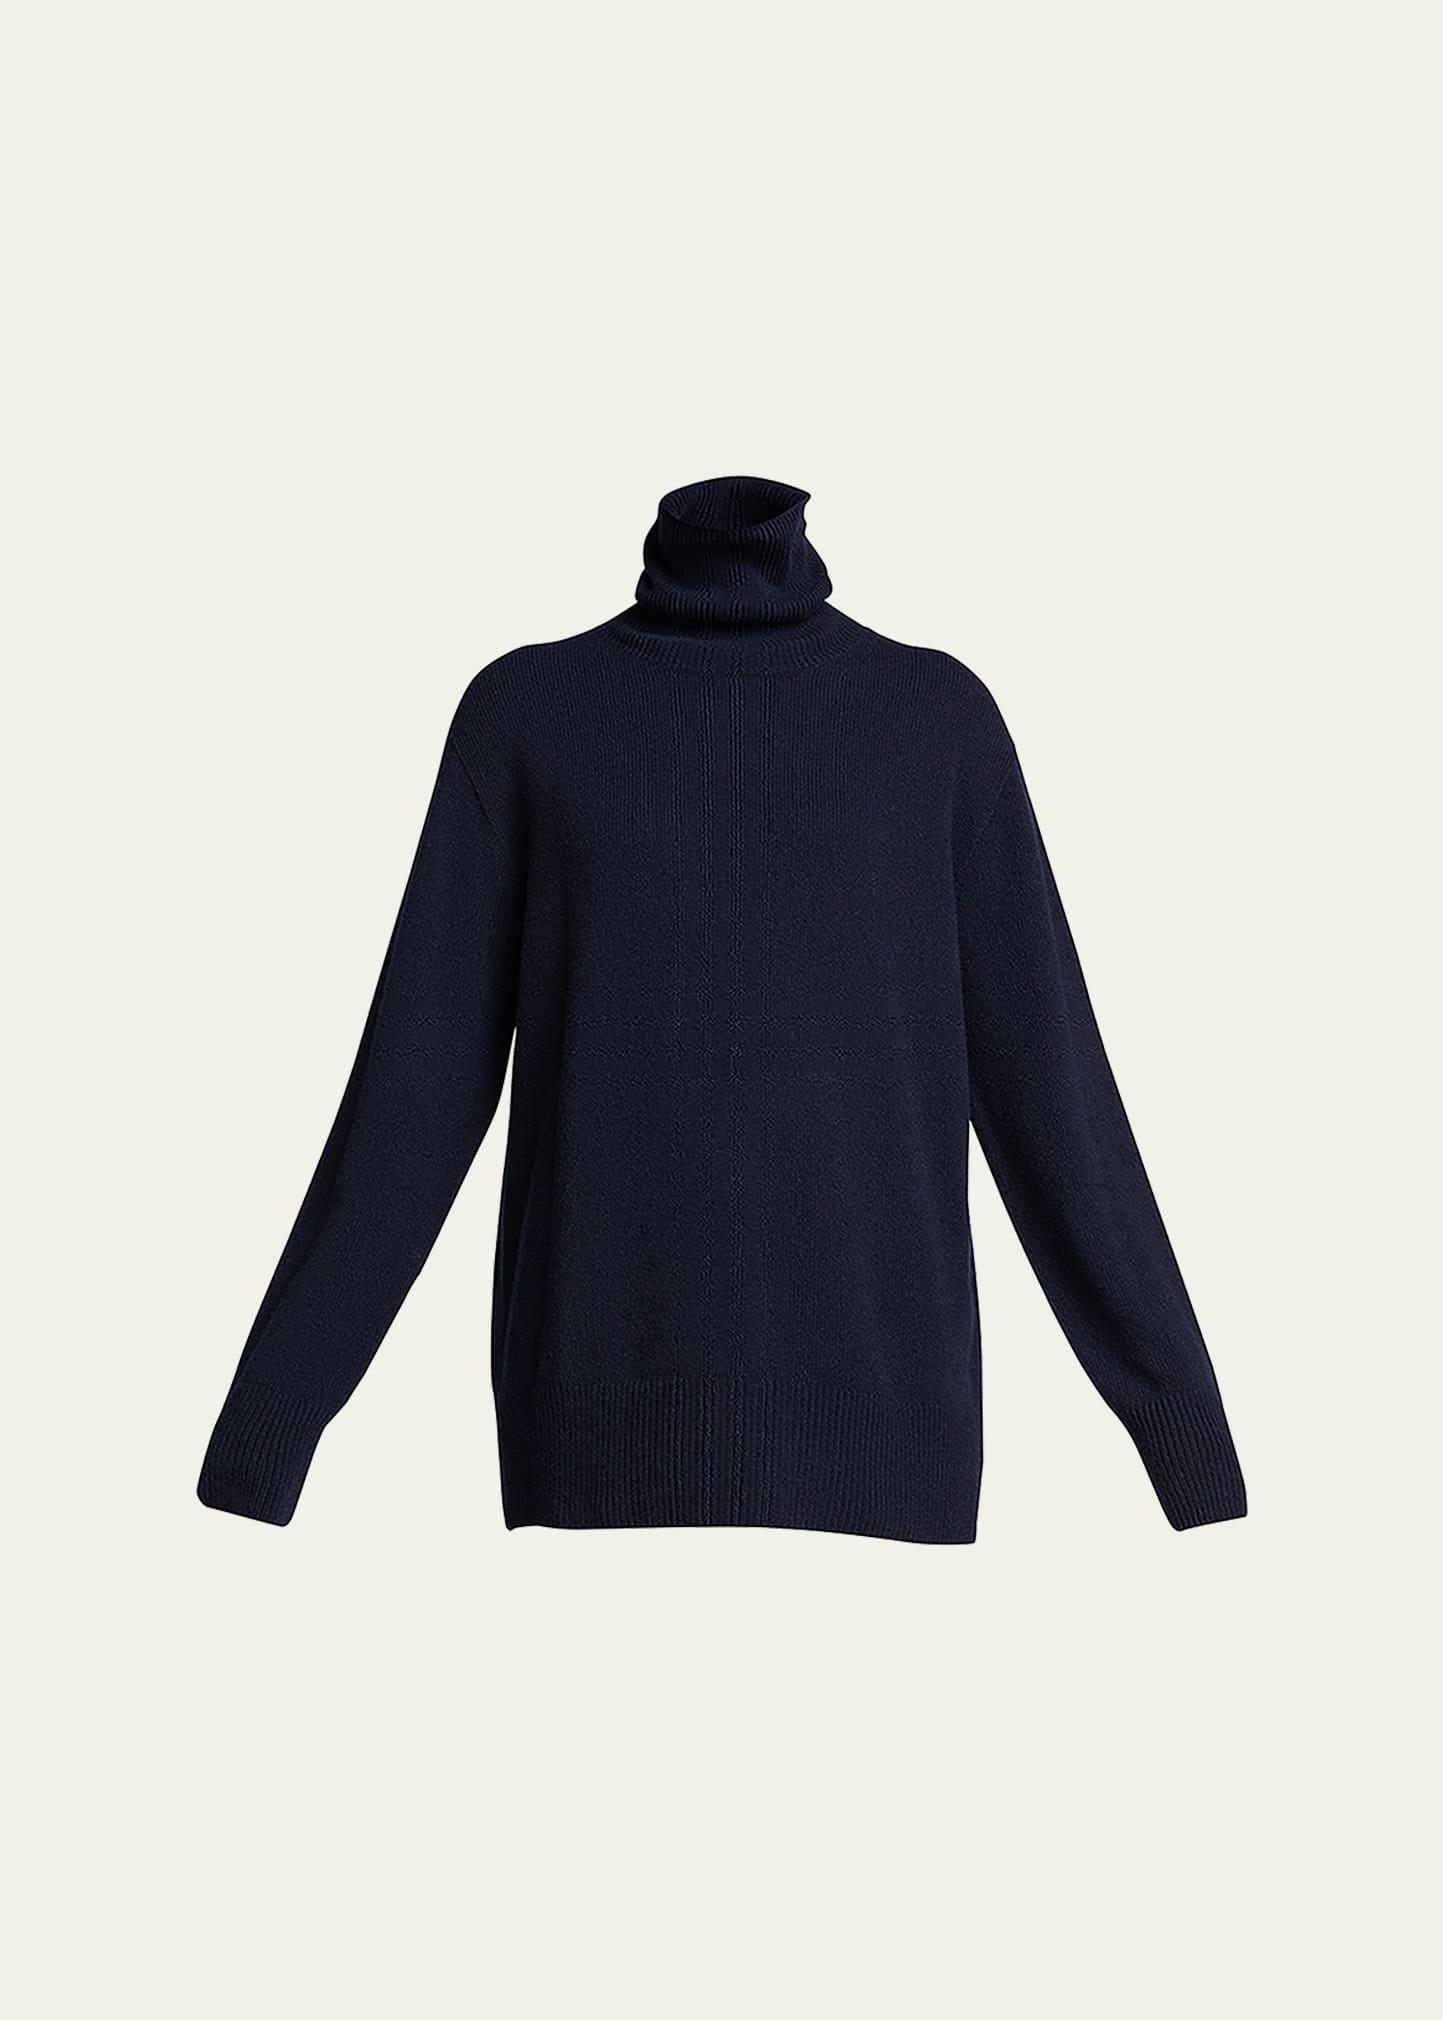 The Row Stepney Sweater in Dark Navy - Navy. Size L (also in ). Product Image